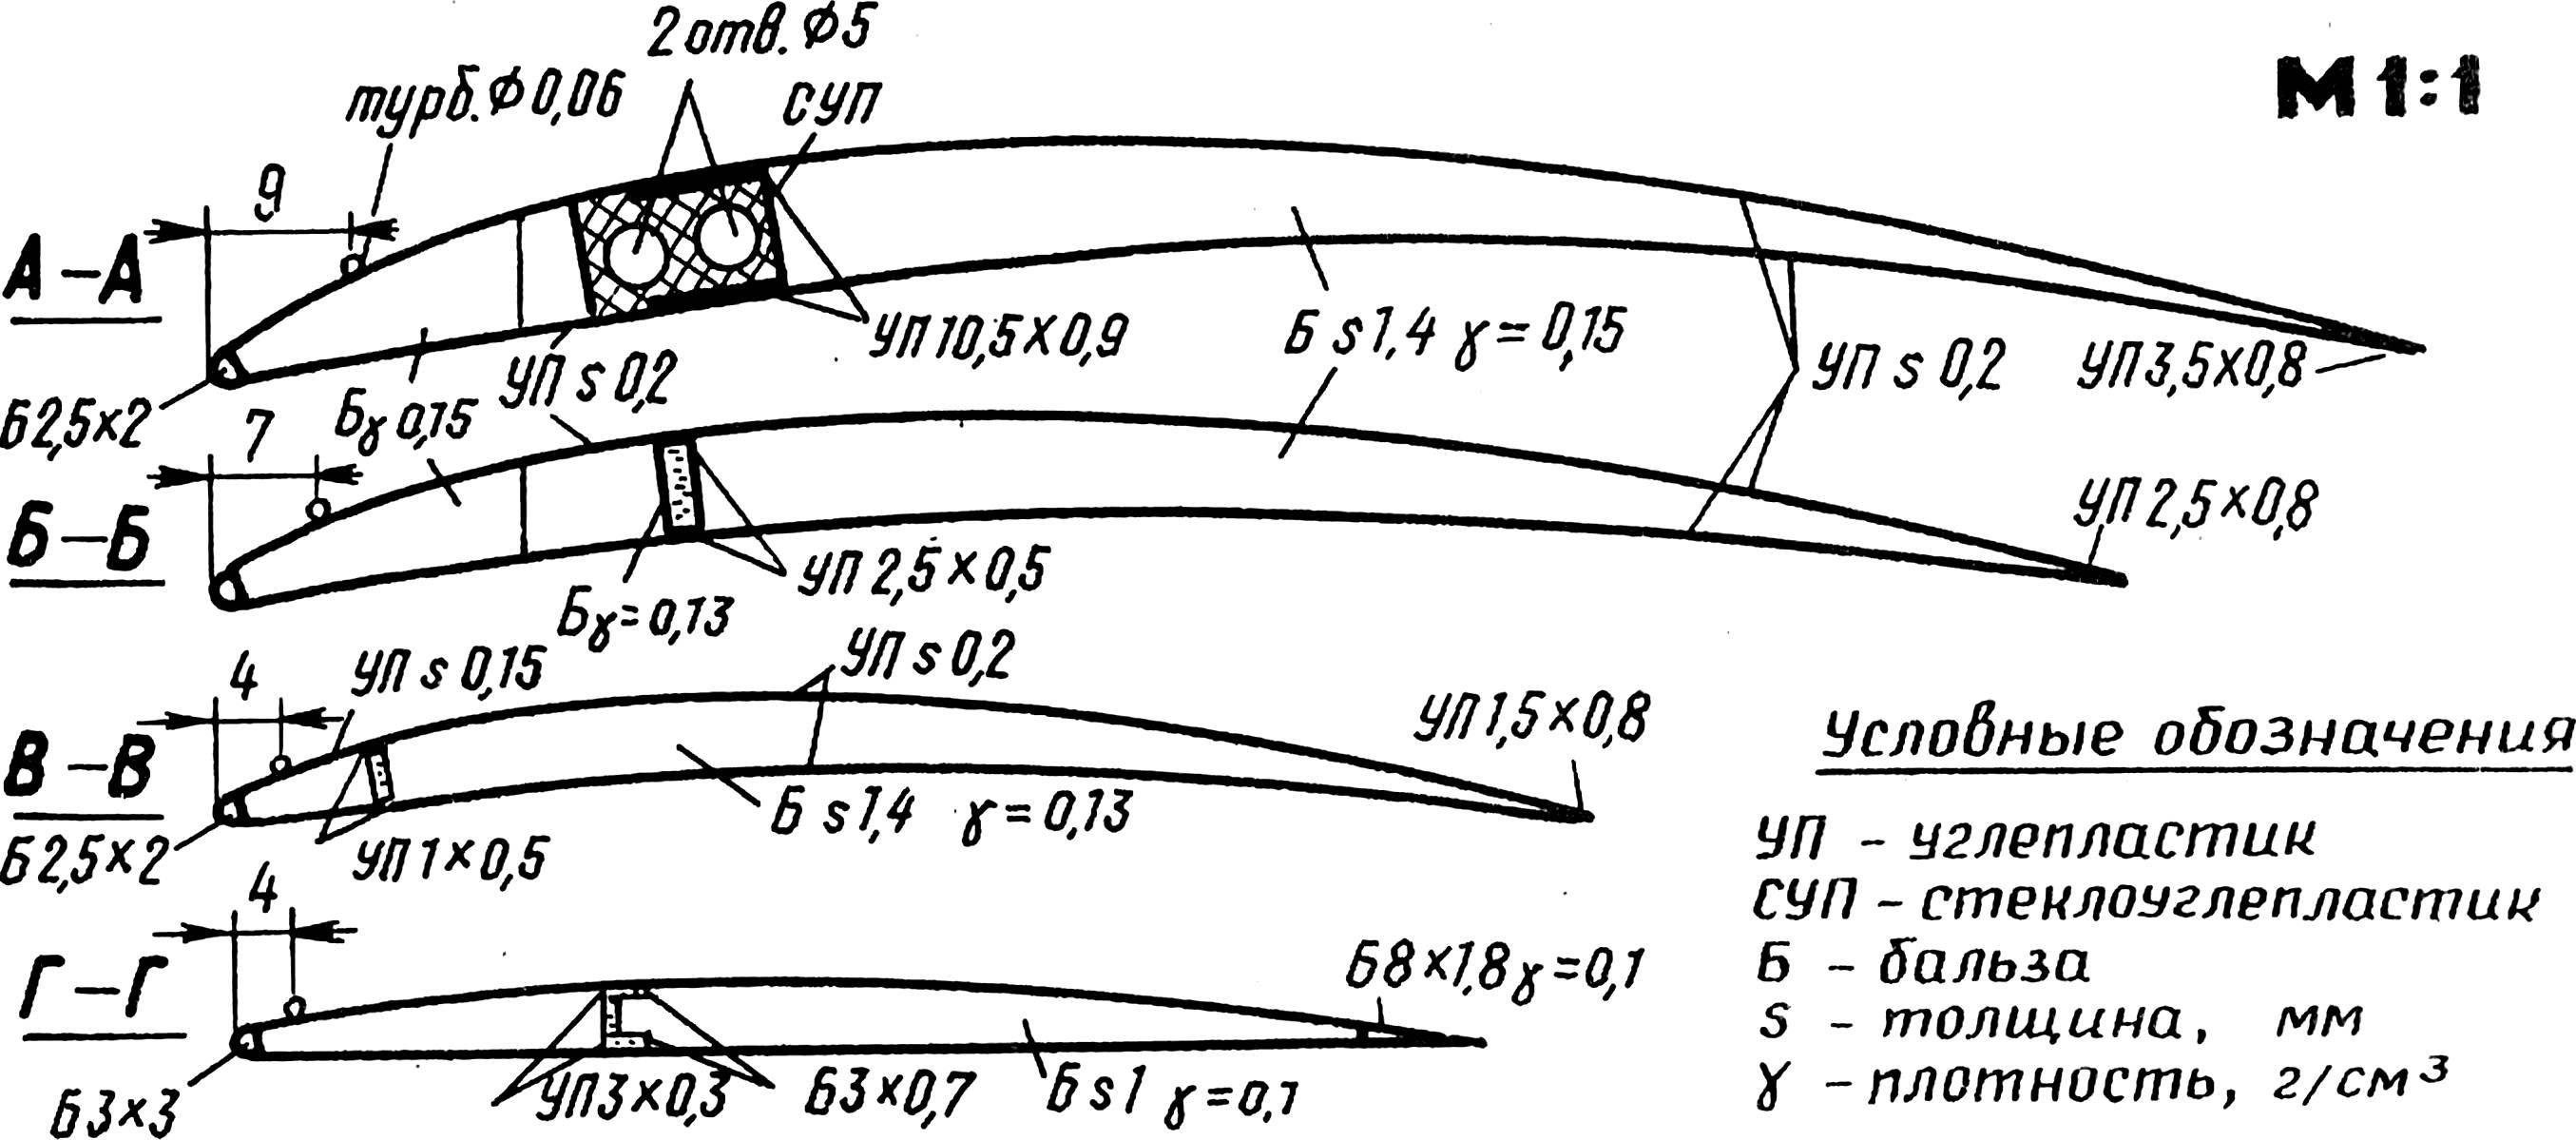 Fig. 1. General view of the model glider F1-A and the most typical section of the wing, stabilizer (bottom).